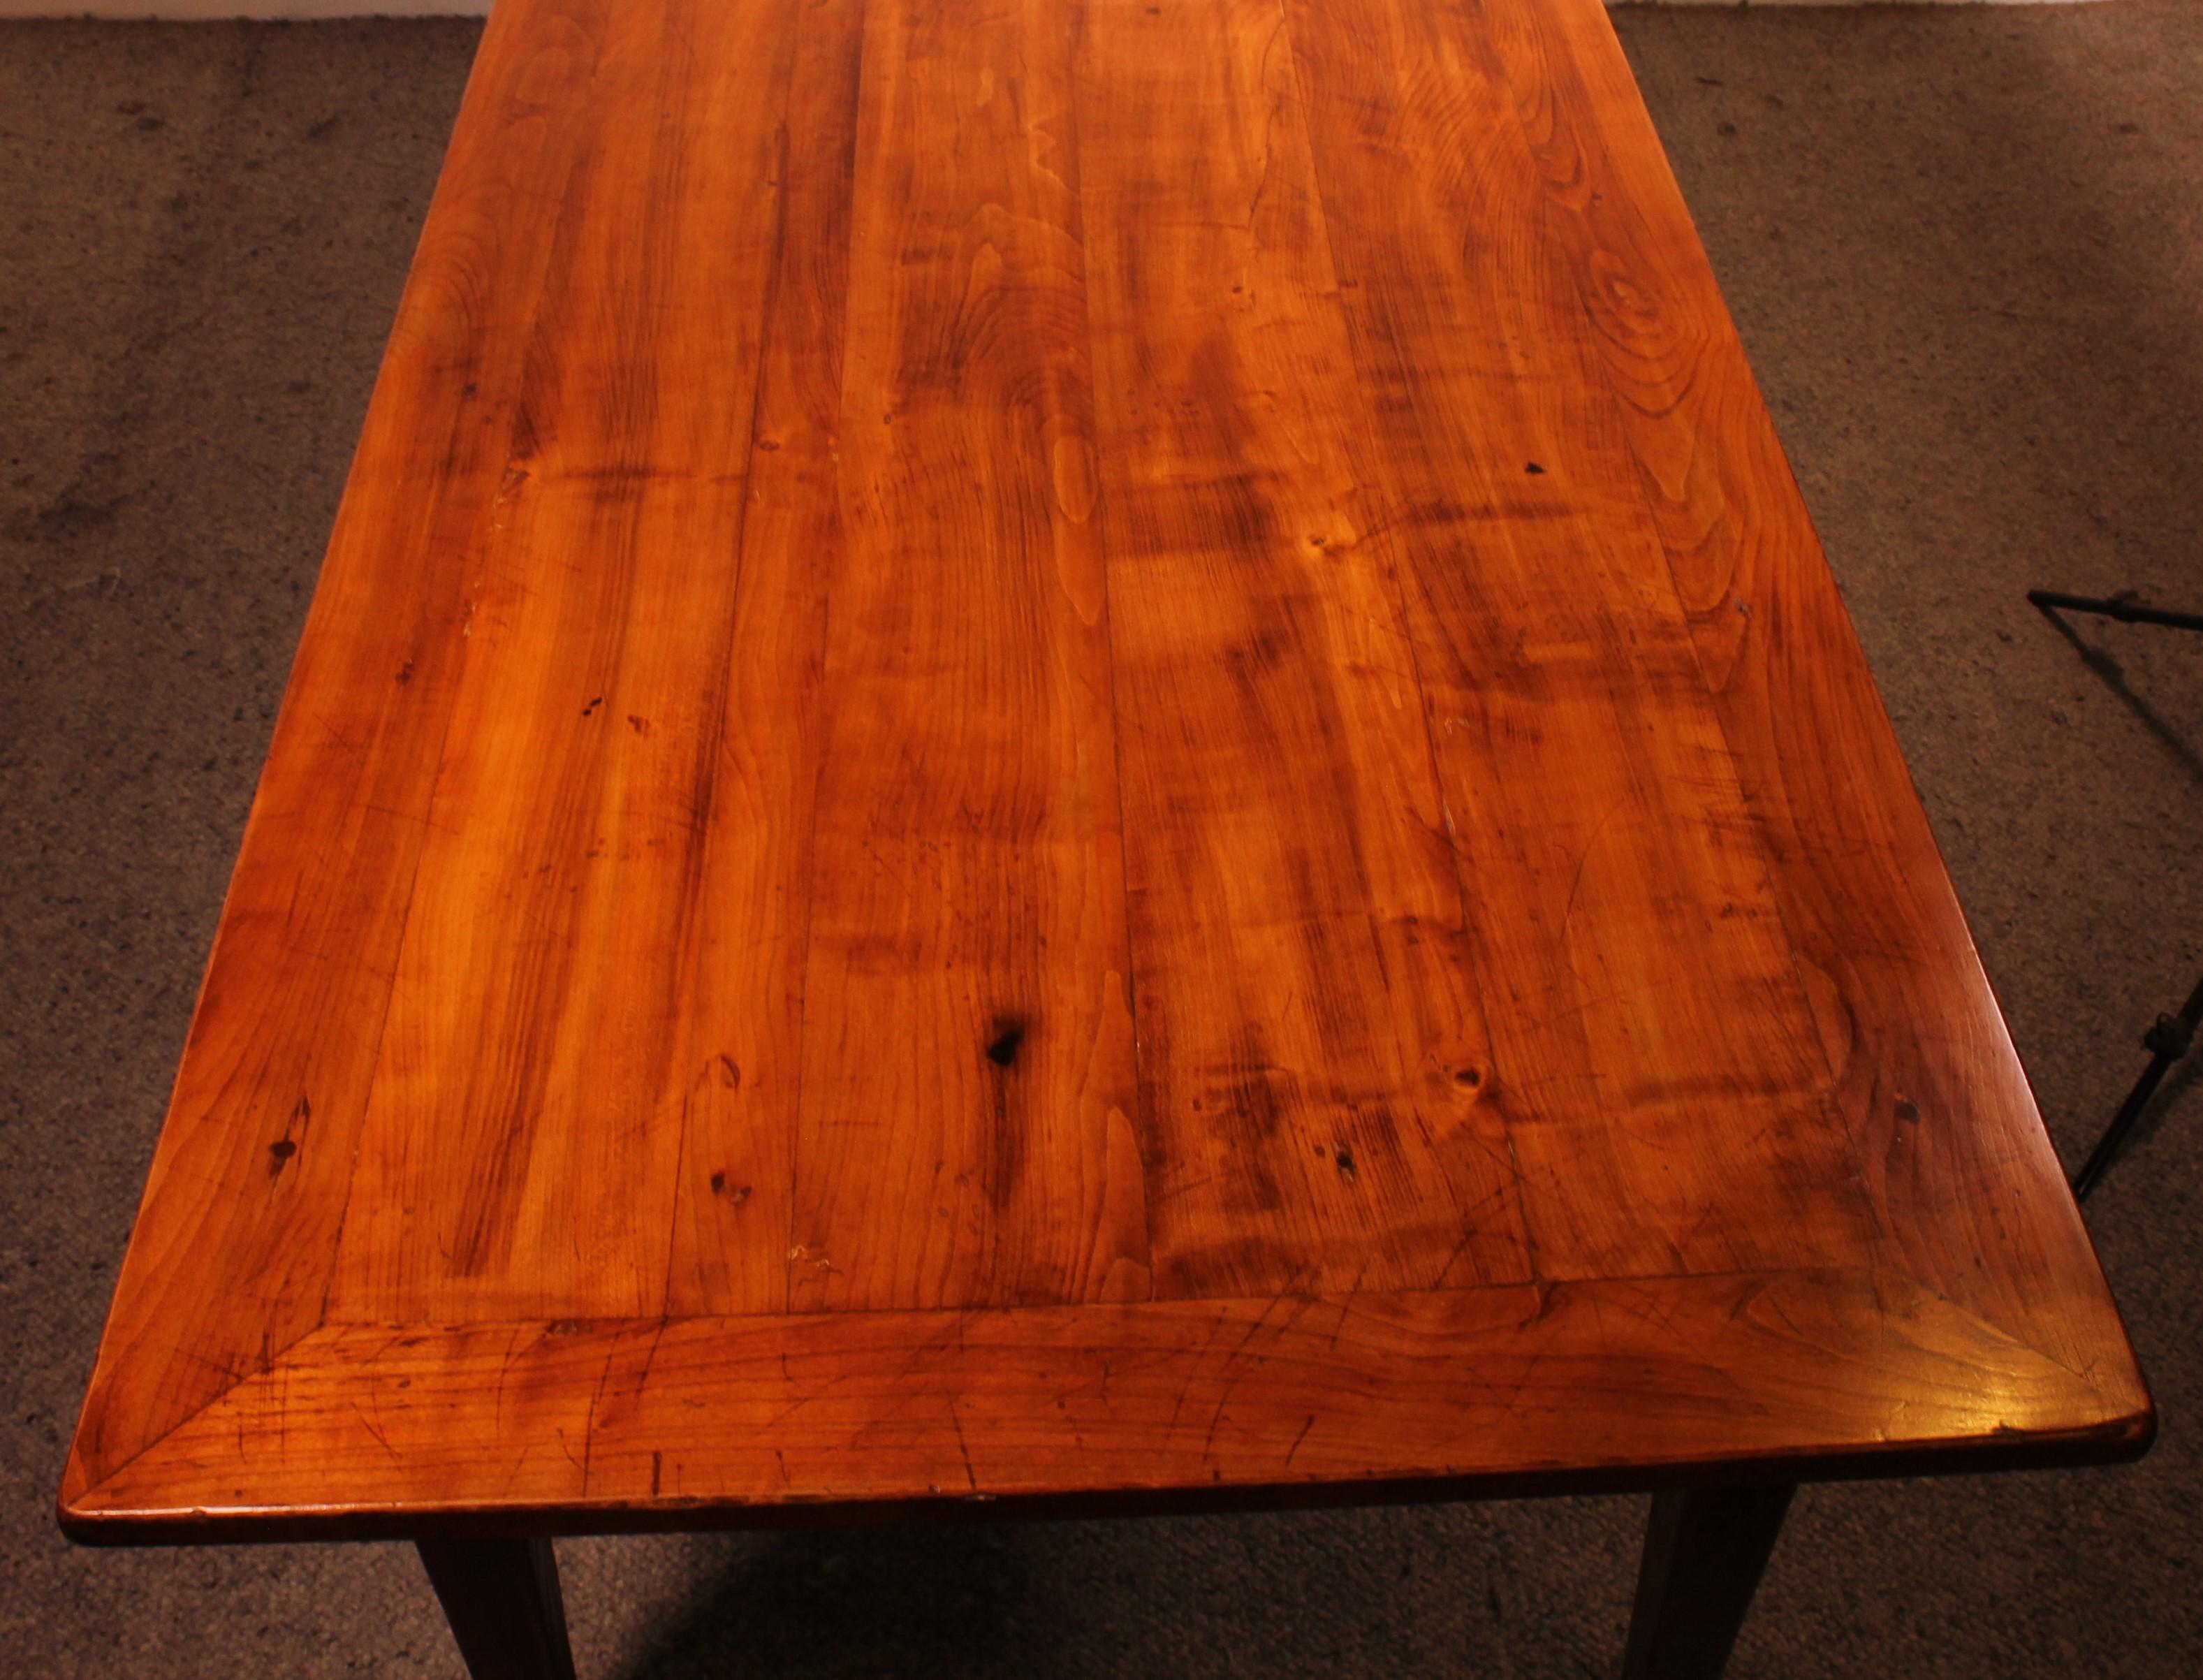 Large 19th Century Cherry Wood Refectory Table With A Width Of 100cm For Sale 9